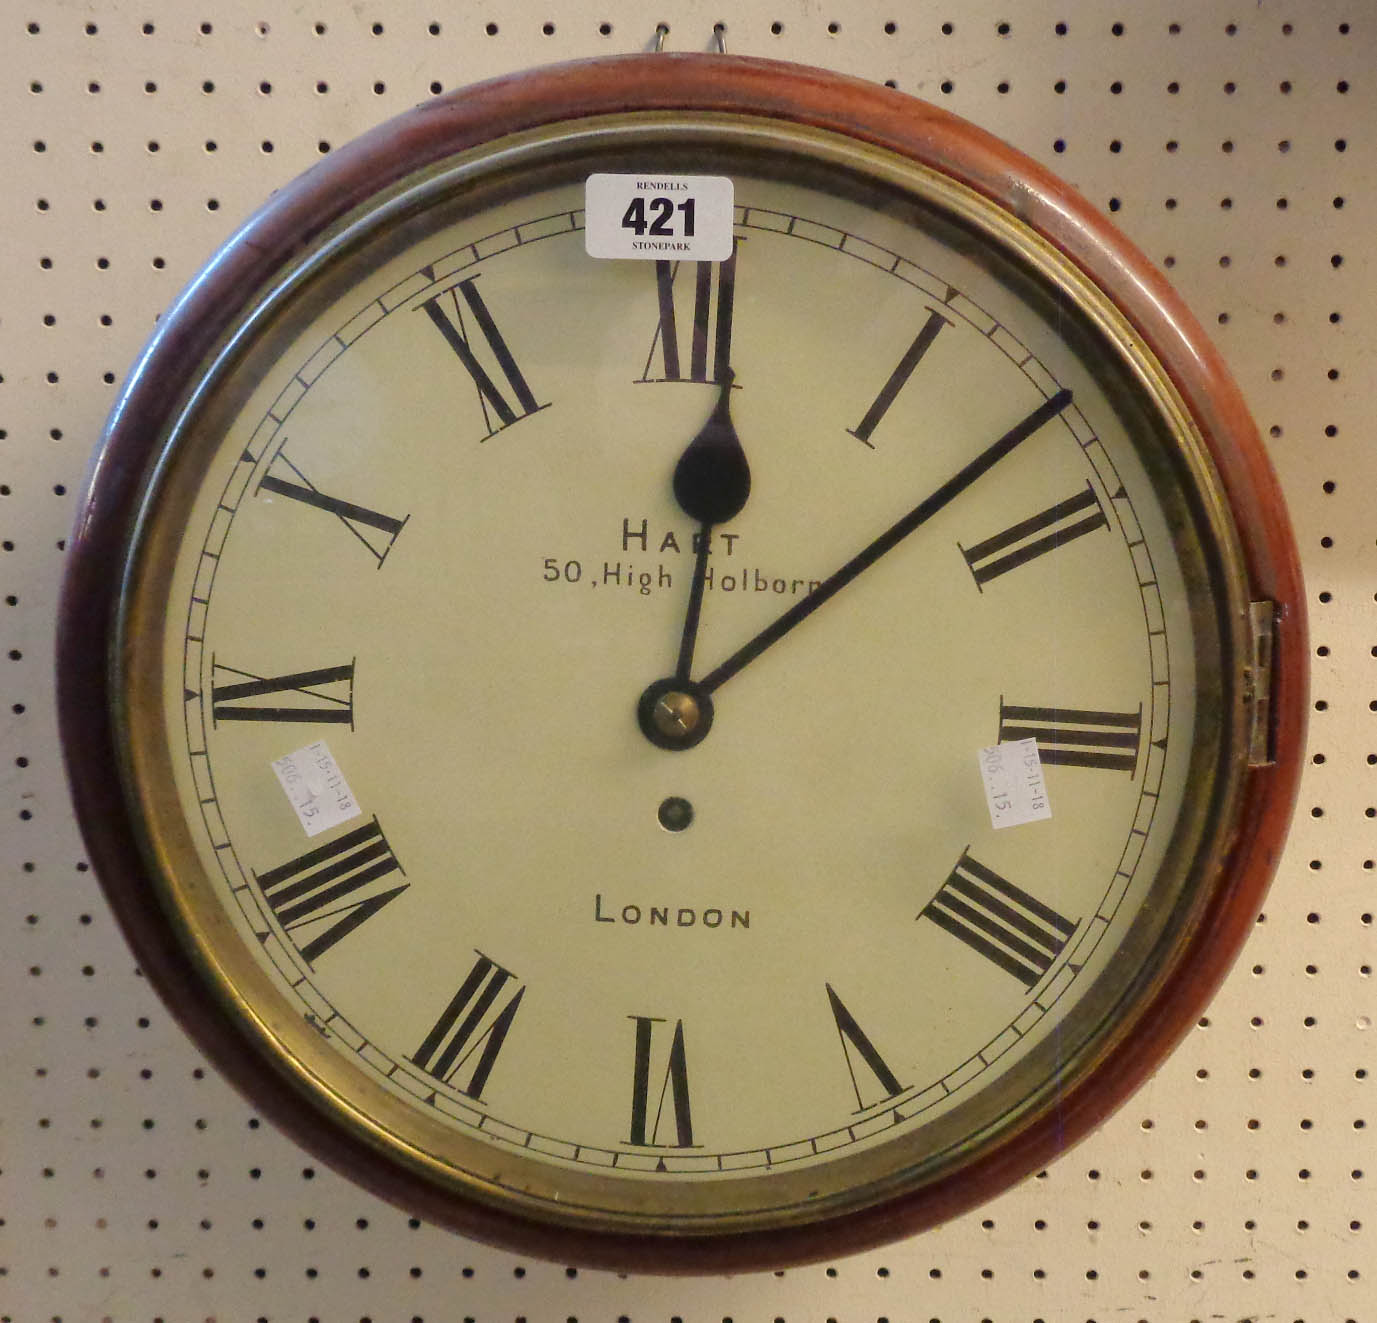 A 19th Century stained wood cased dial wall timepiece, the 12" dial marked for Hart 50, High